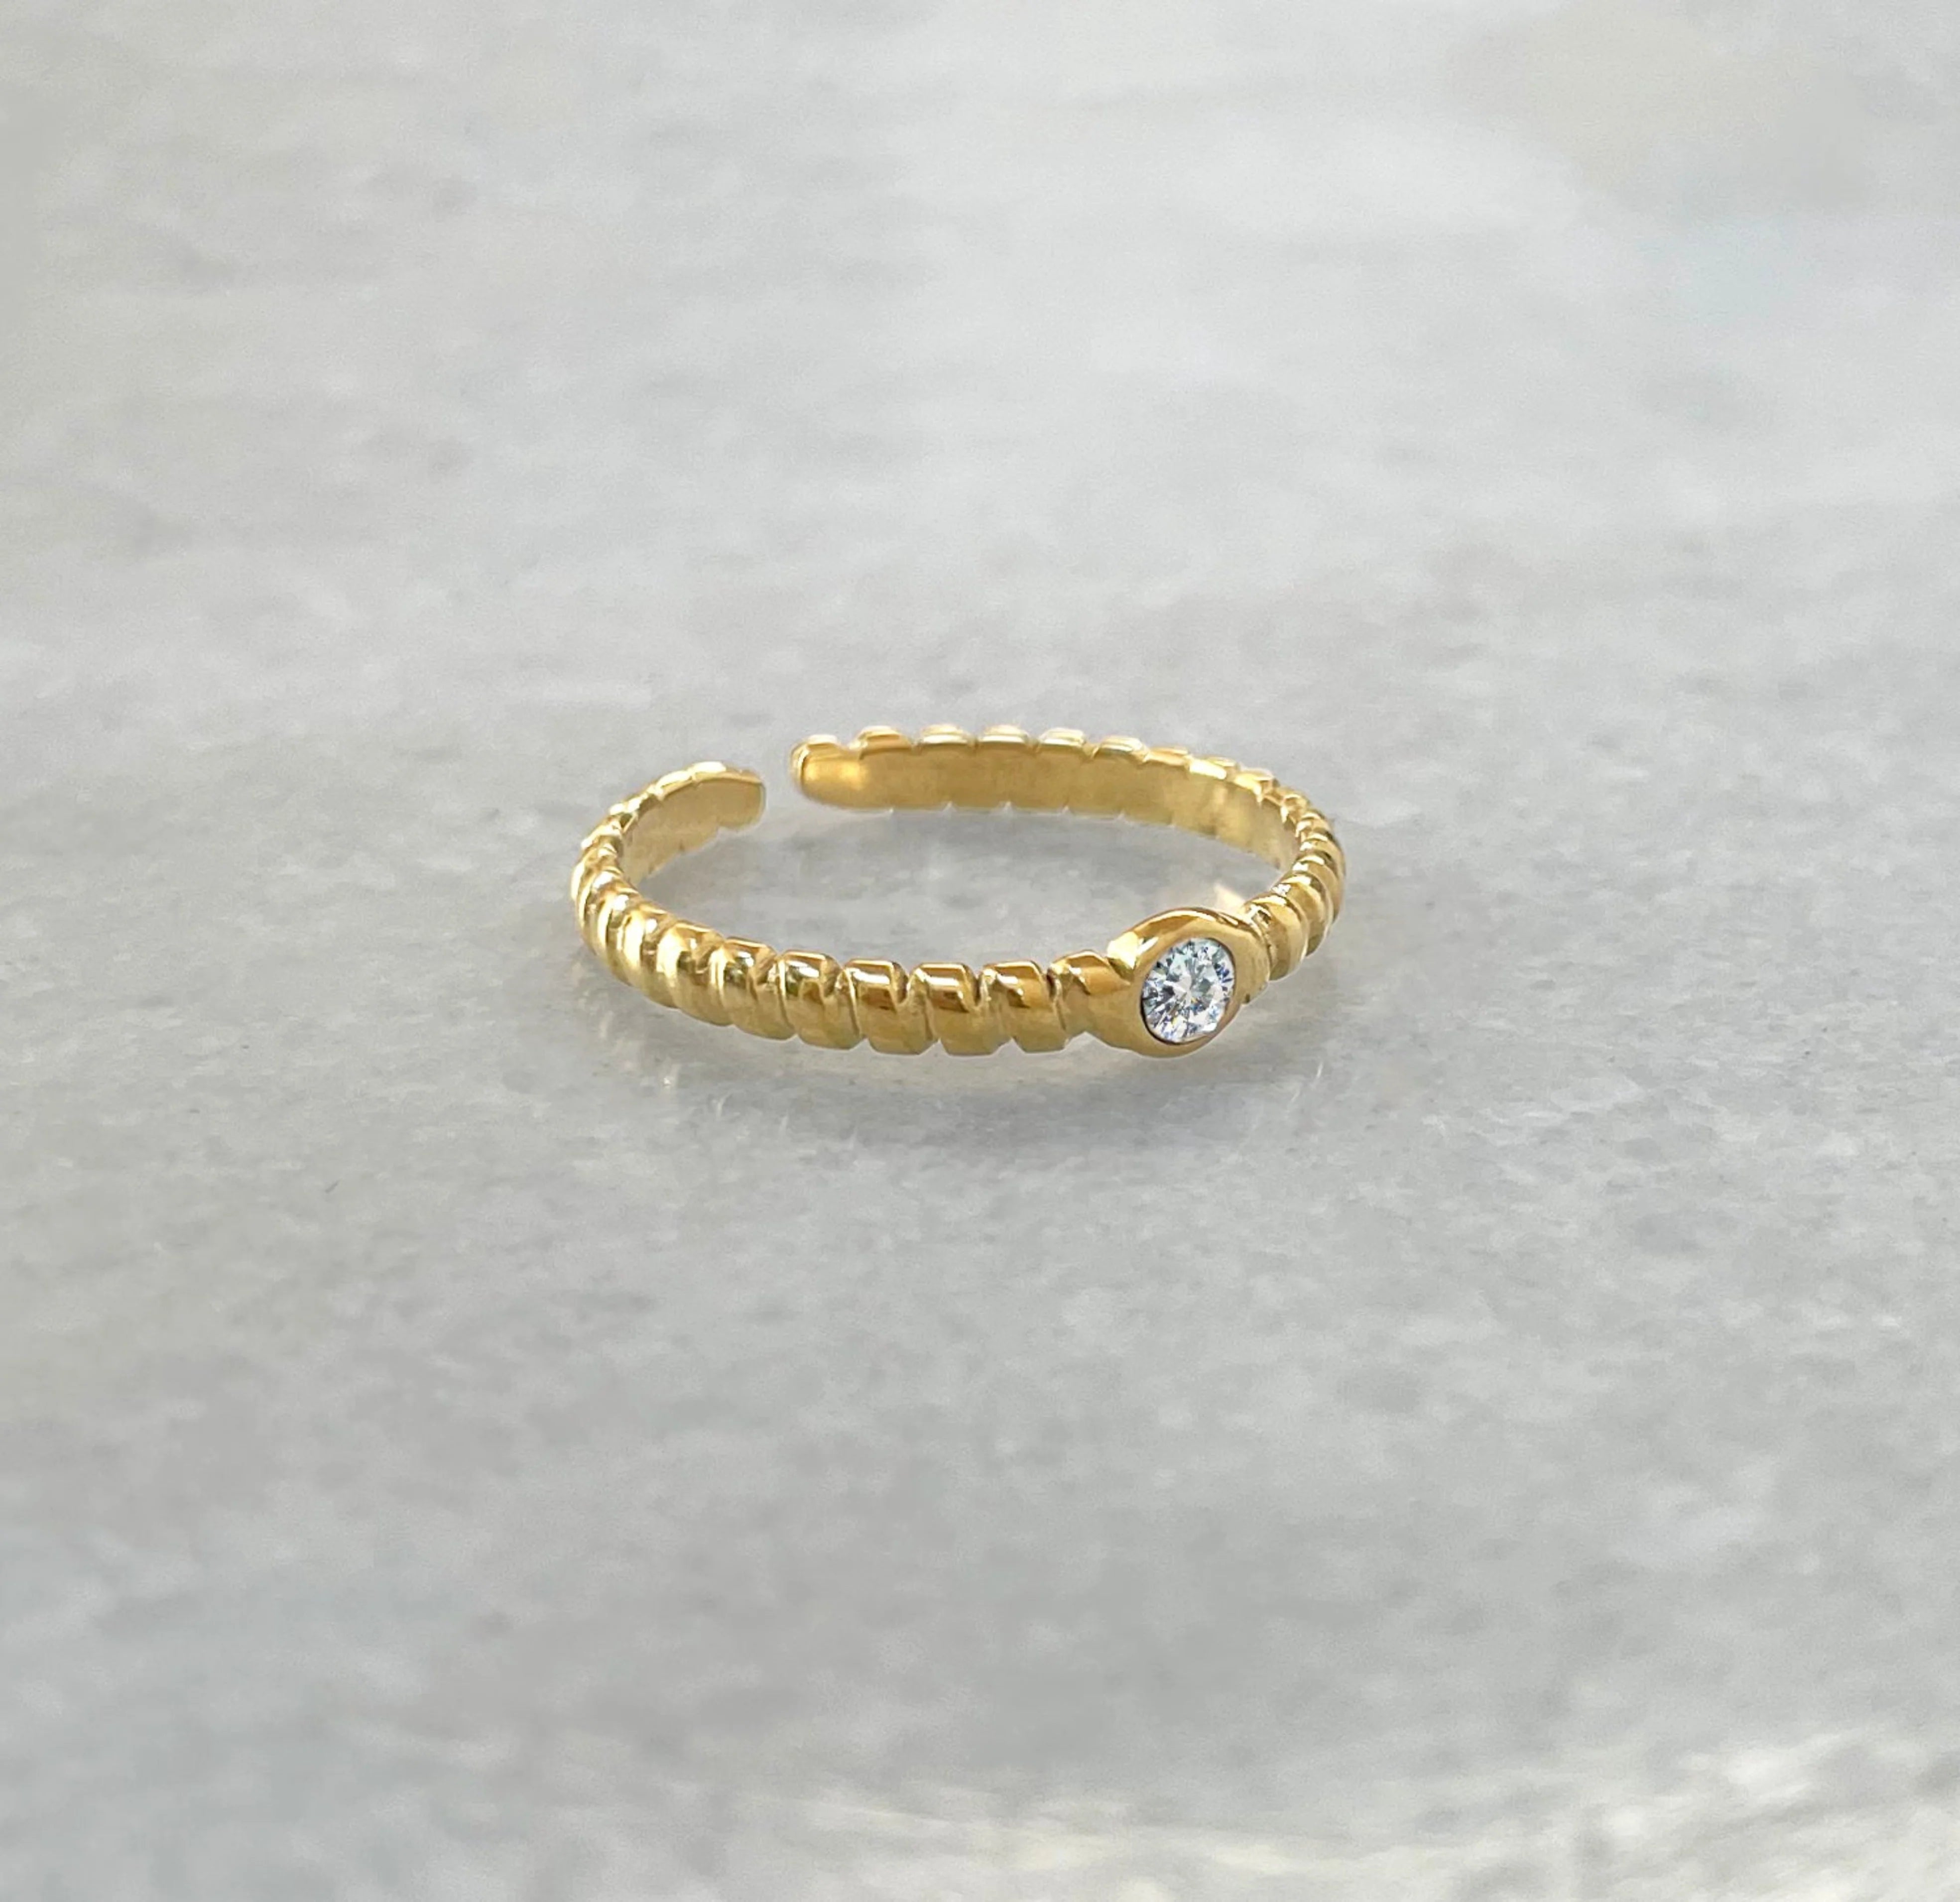 Helena gold adjustable solitaire ring. Gold waterproof jewelry